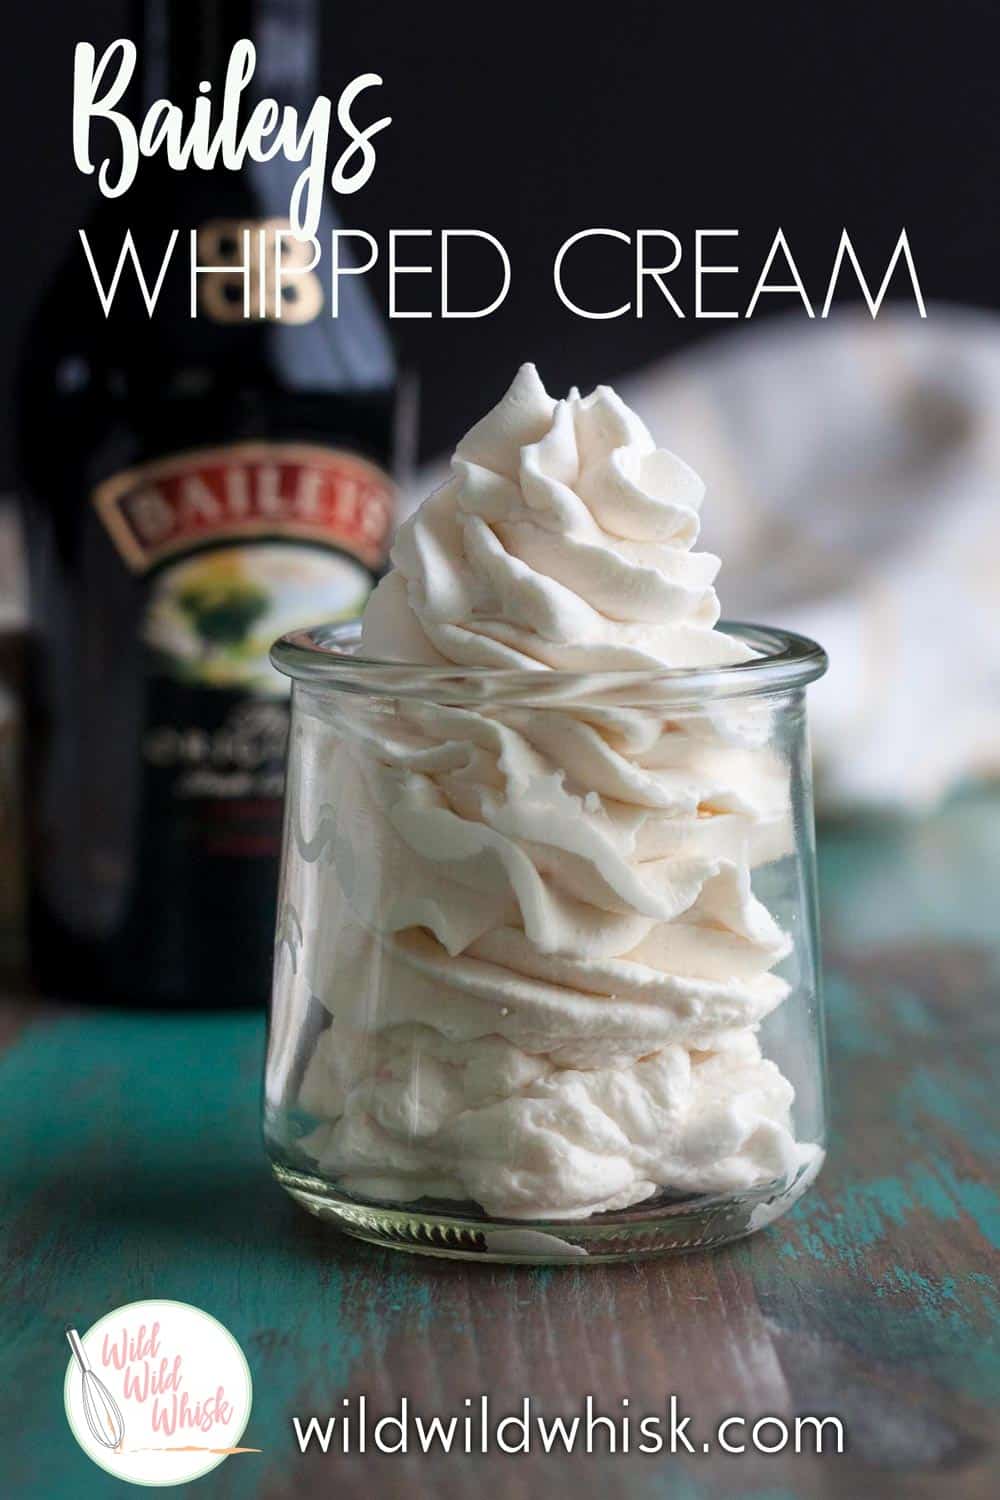 This Irish Cream Whipped Cream is slightly sweet and extra boozy. It’s the perfect homemade whipped cream with just a little kick to get this party started. | wildwildwhisk.com #irishcream #whippedcream